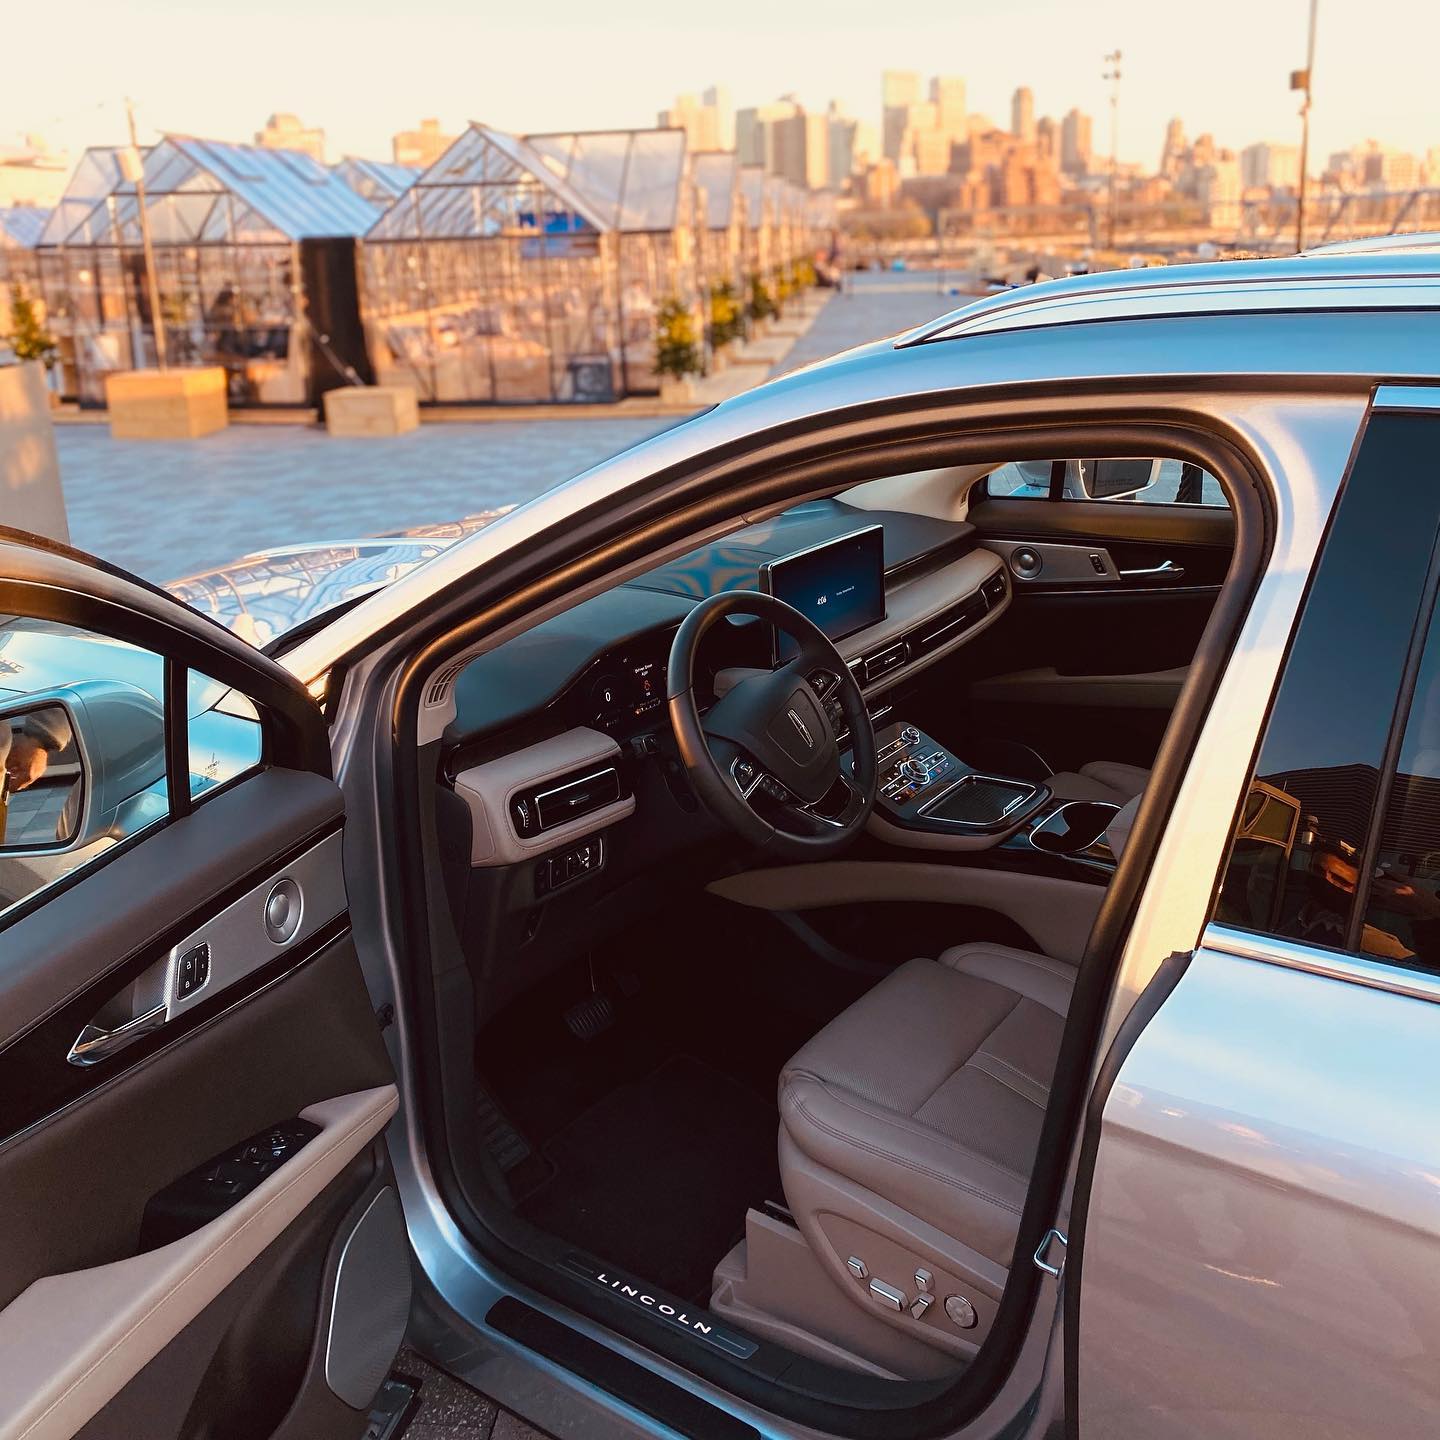 In case you missed it our friends at @lincoln stopped by the Seaport District! Ride in style and experience the 2021 with signature technologies and interior.